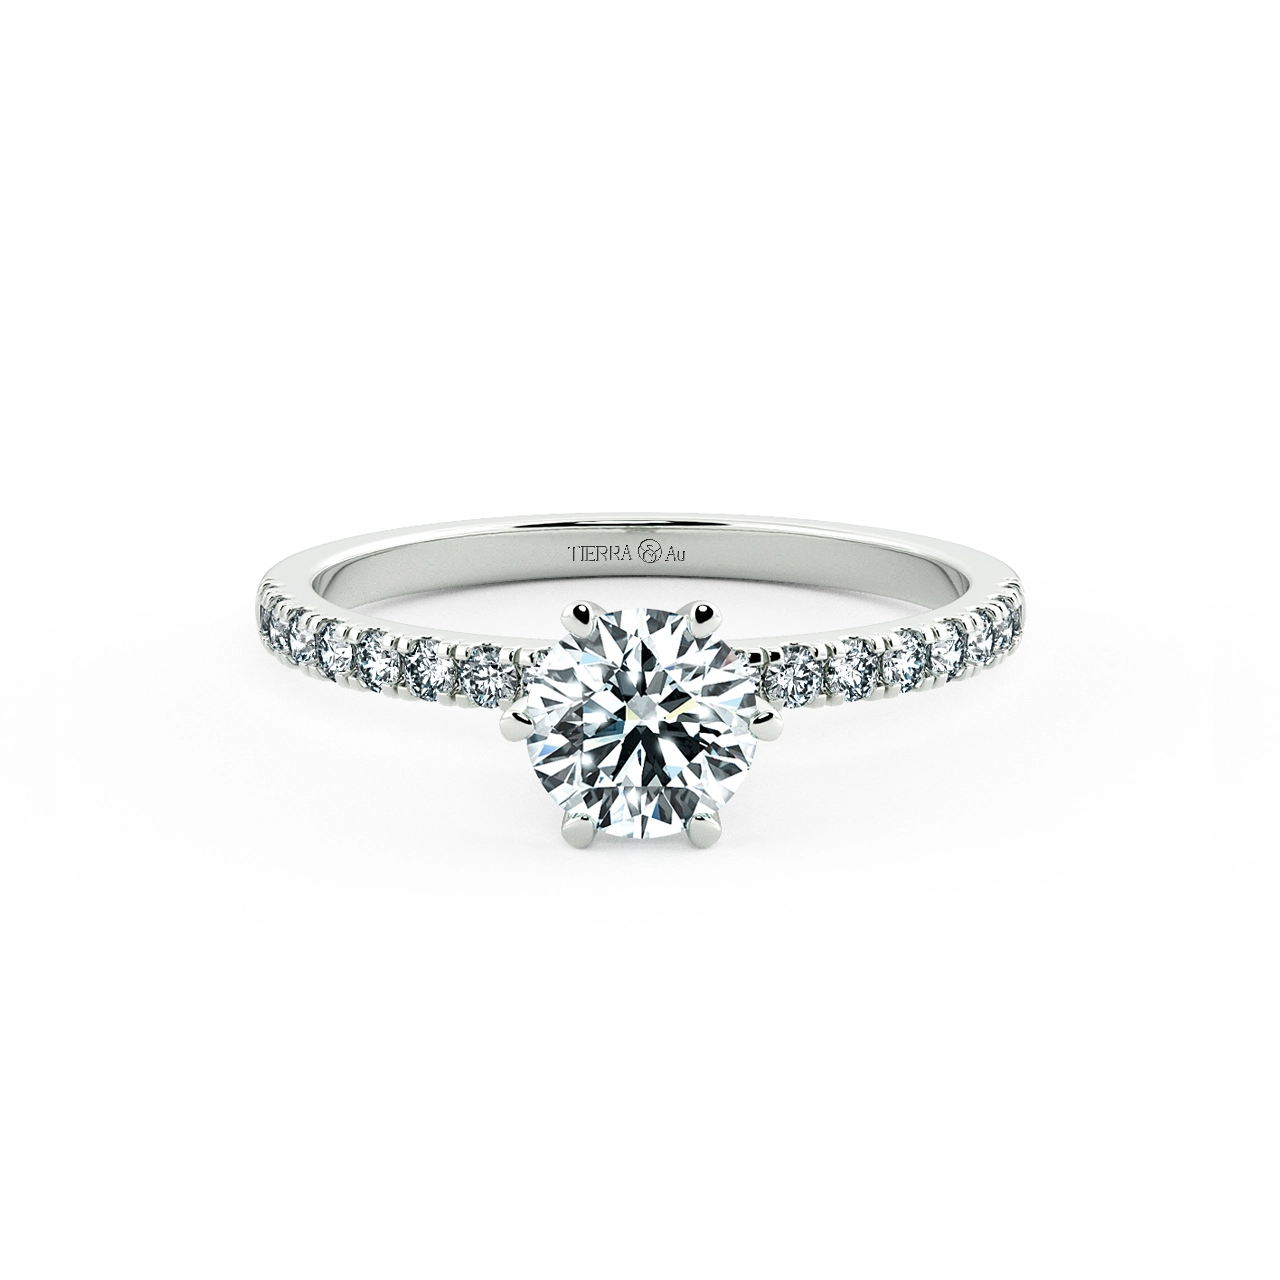 Six Prongs Solitaire Pave Engagement Ring NCH1203 1